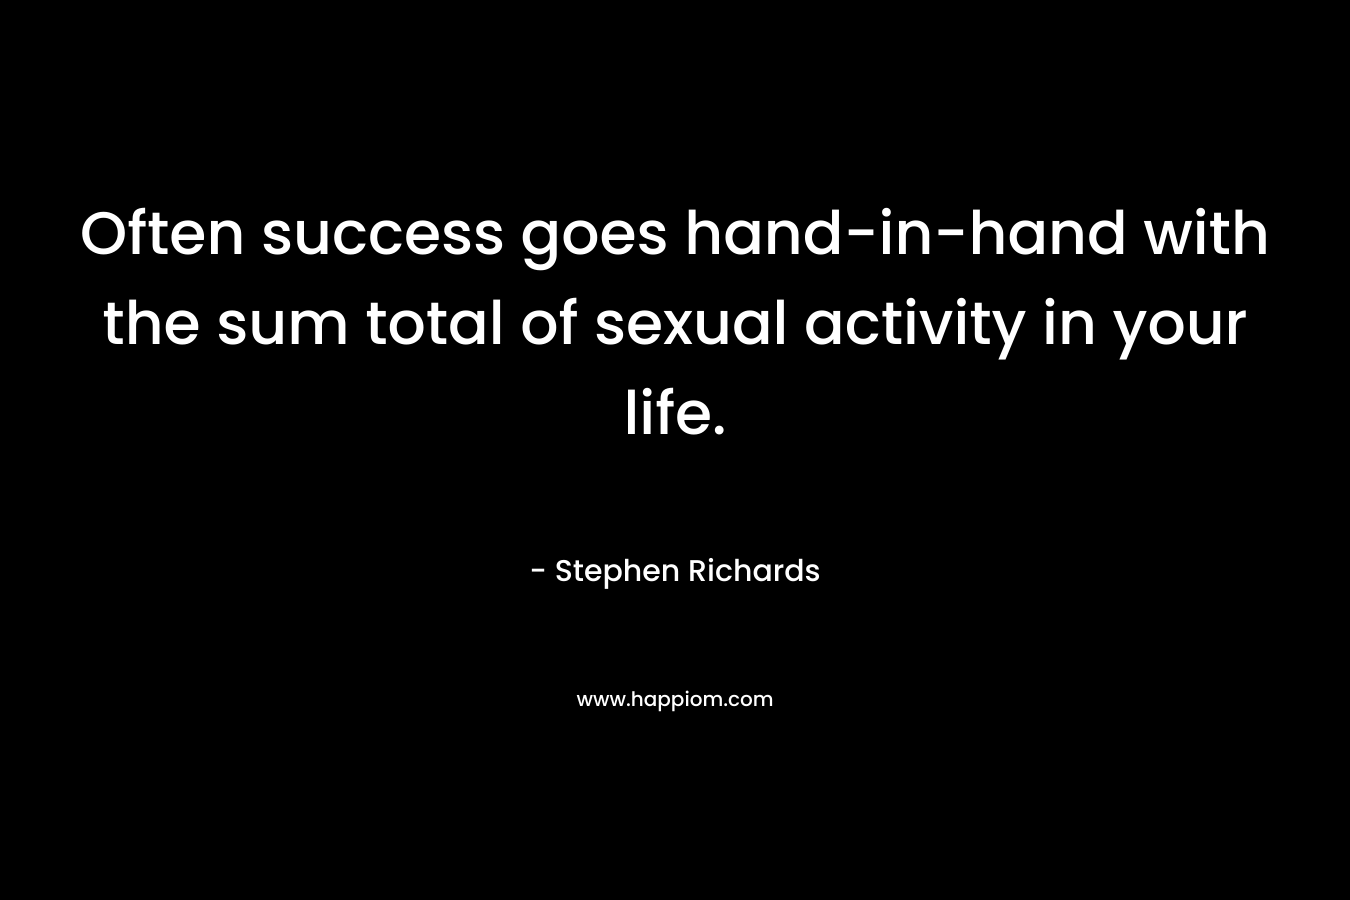 Often success goes hand-in-hand with the sum total of sexual activity in your life.